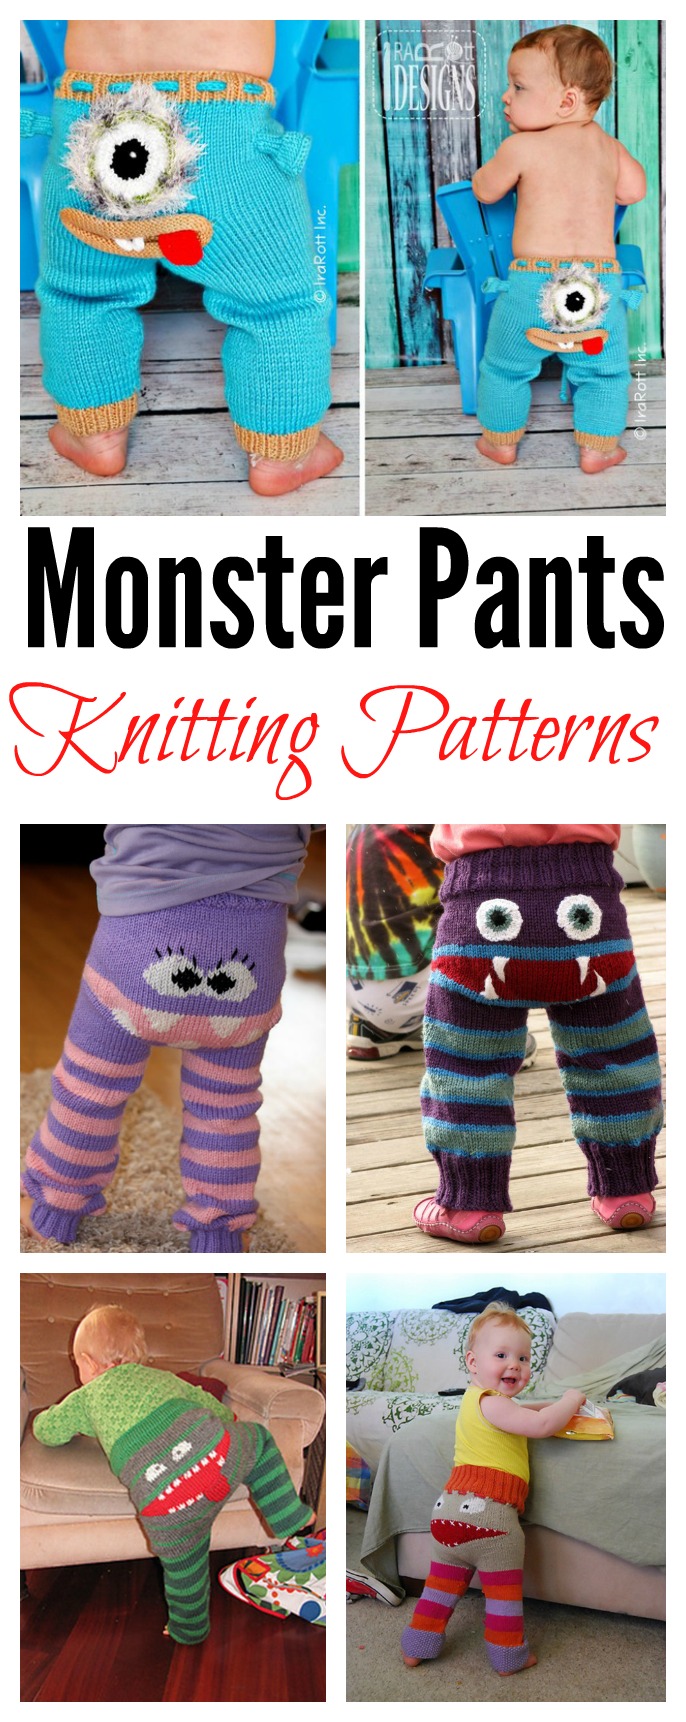 DIY Knit Monster Pants With Patterns 